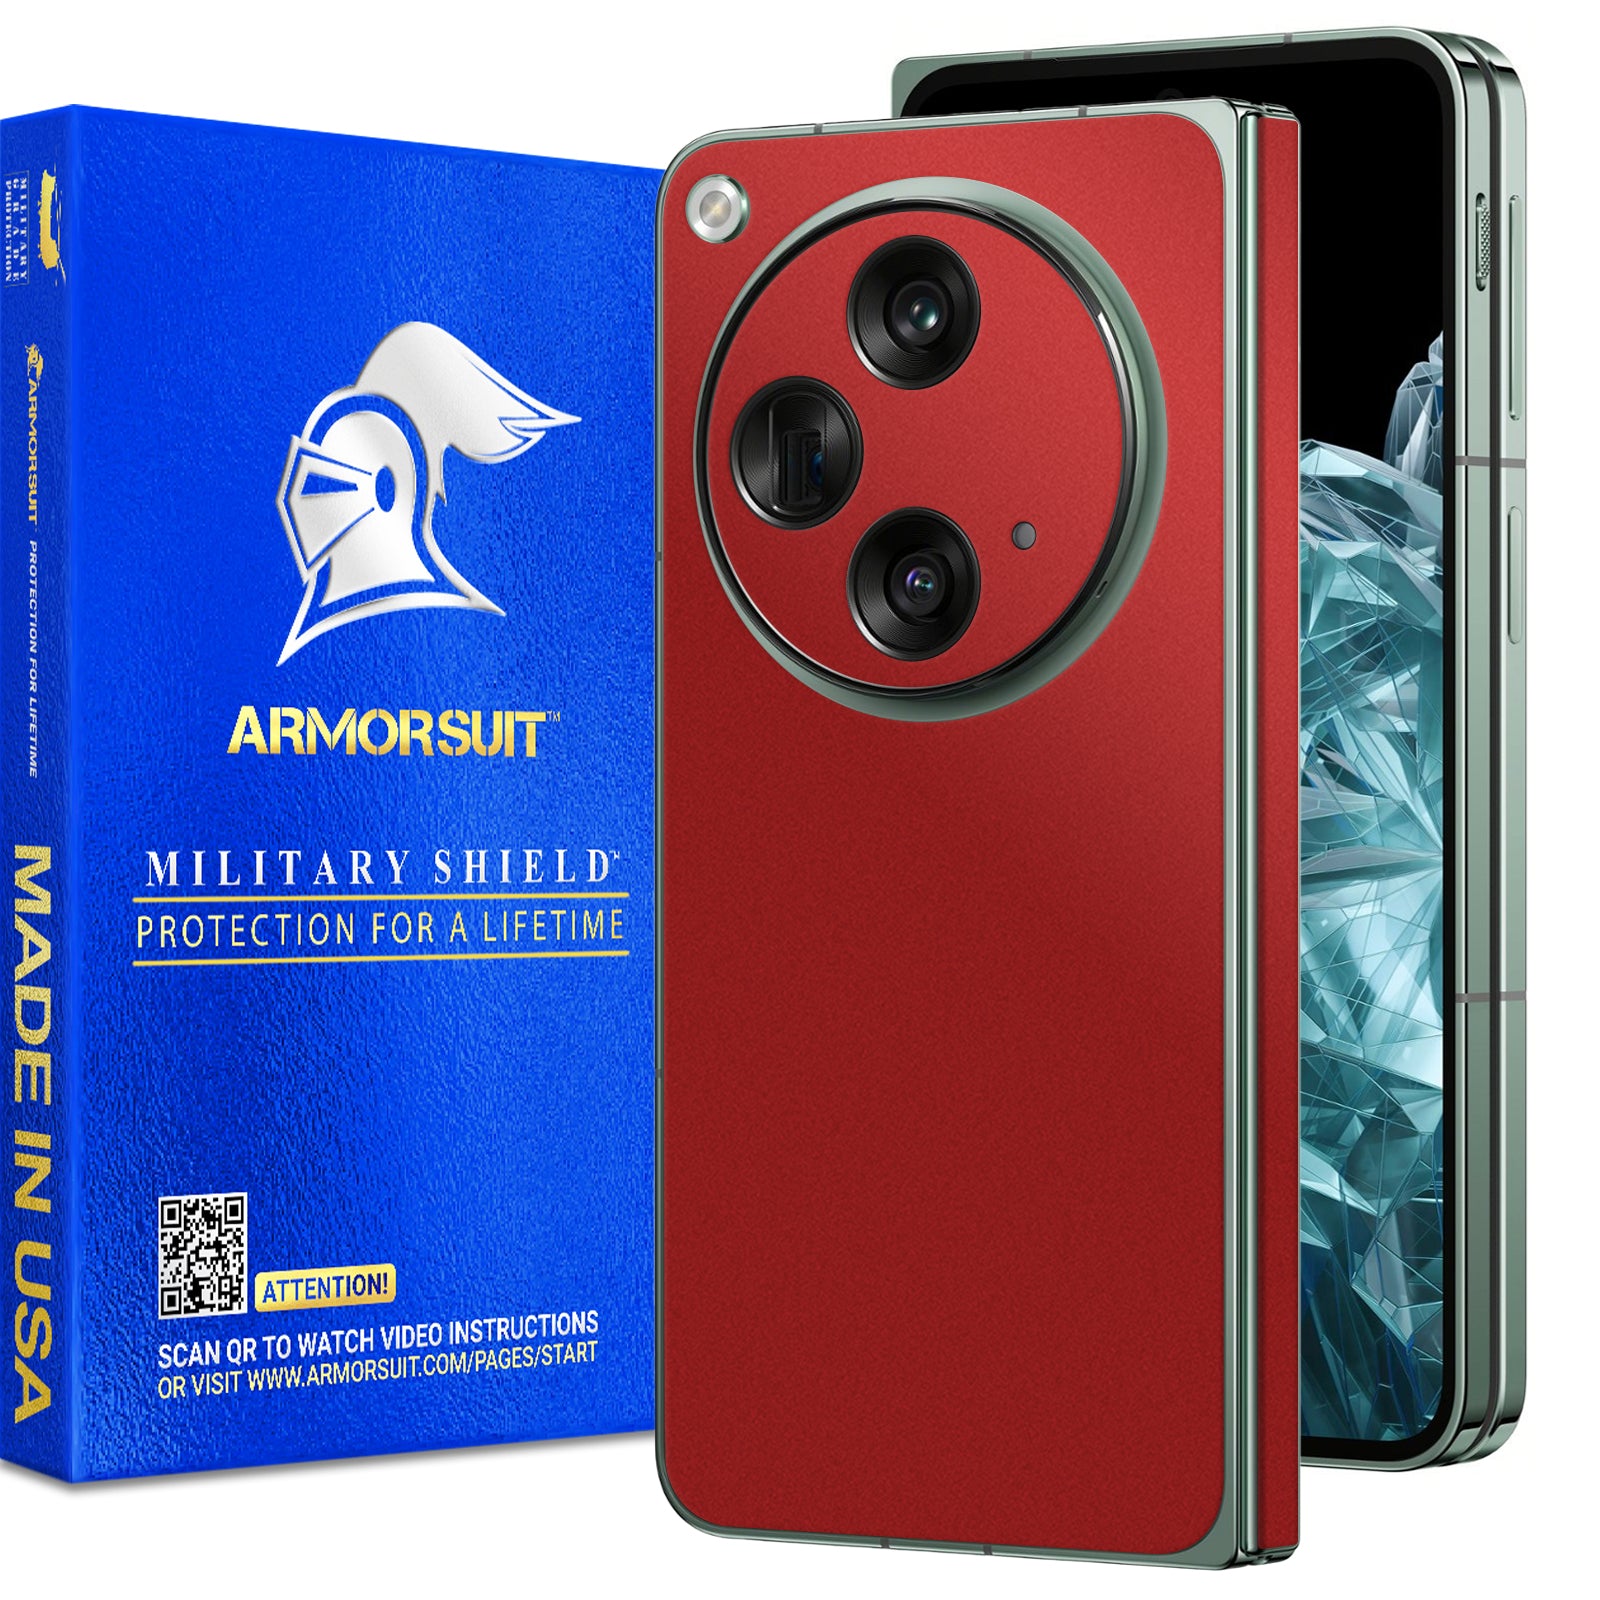 ArmorSuit MilitaryShield Vinyl Skin for OnePlus Open (Green Color only)